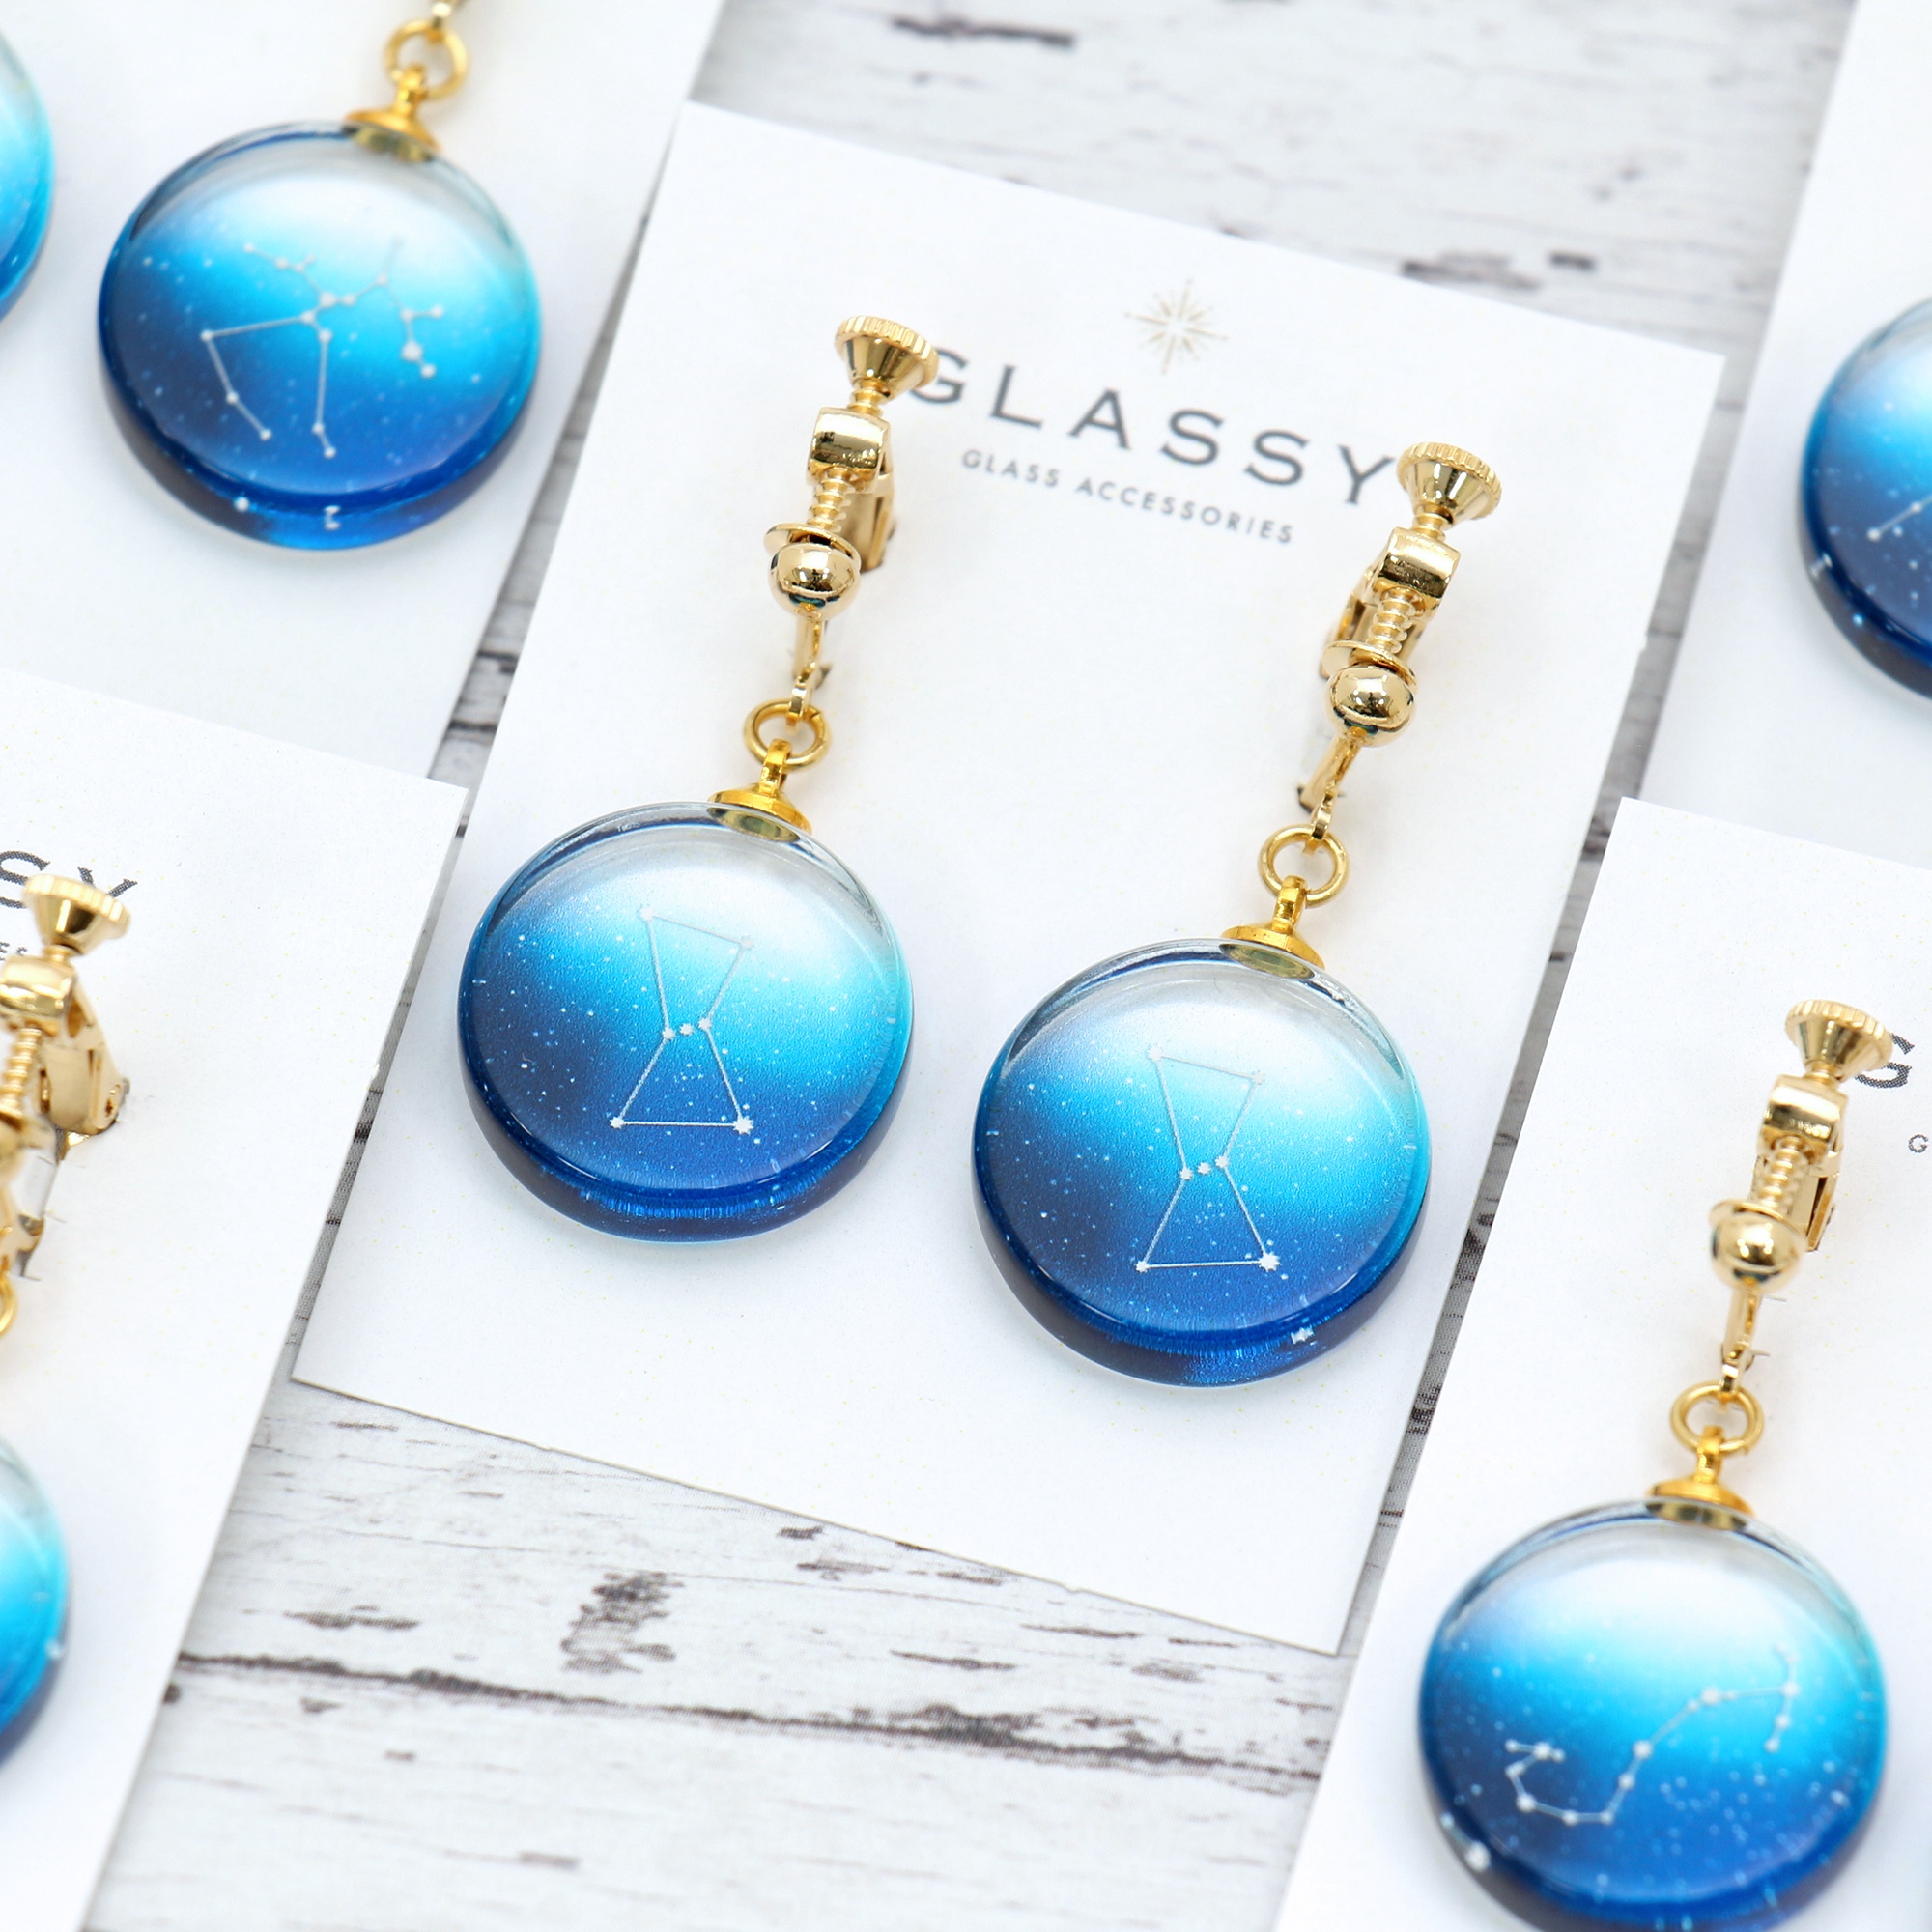 Glass accessories Earring CONSTELLATION Aries round shape